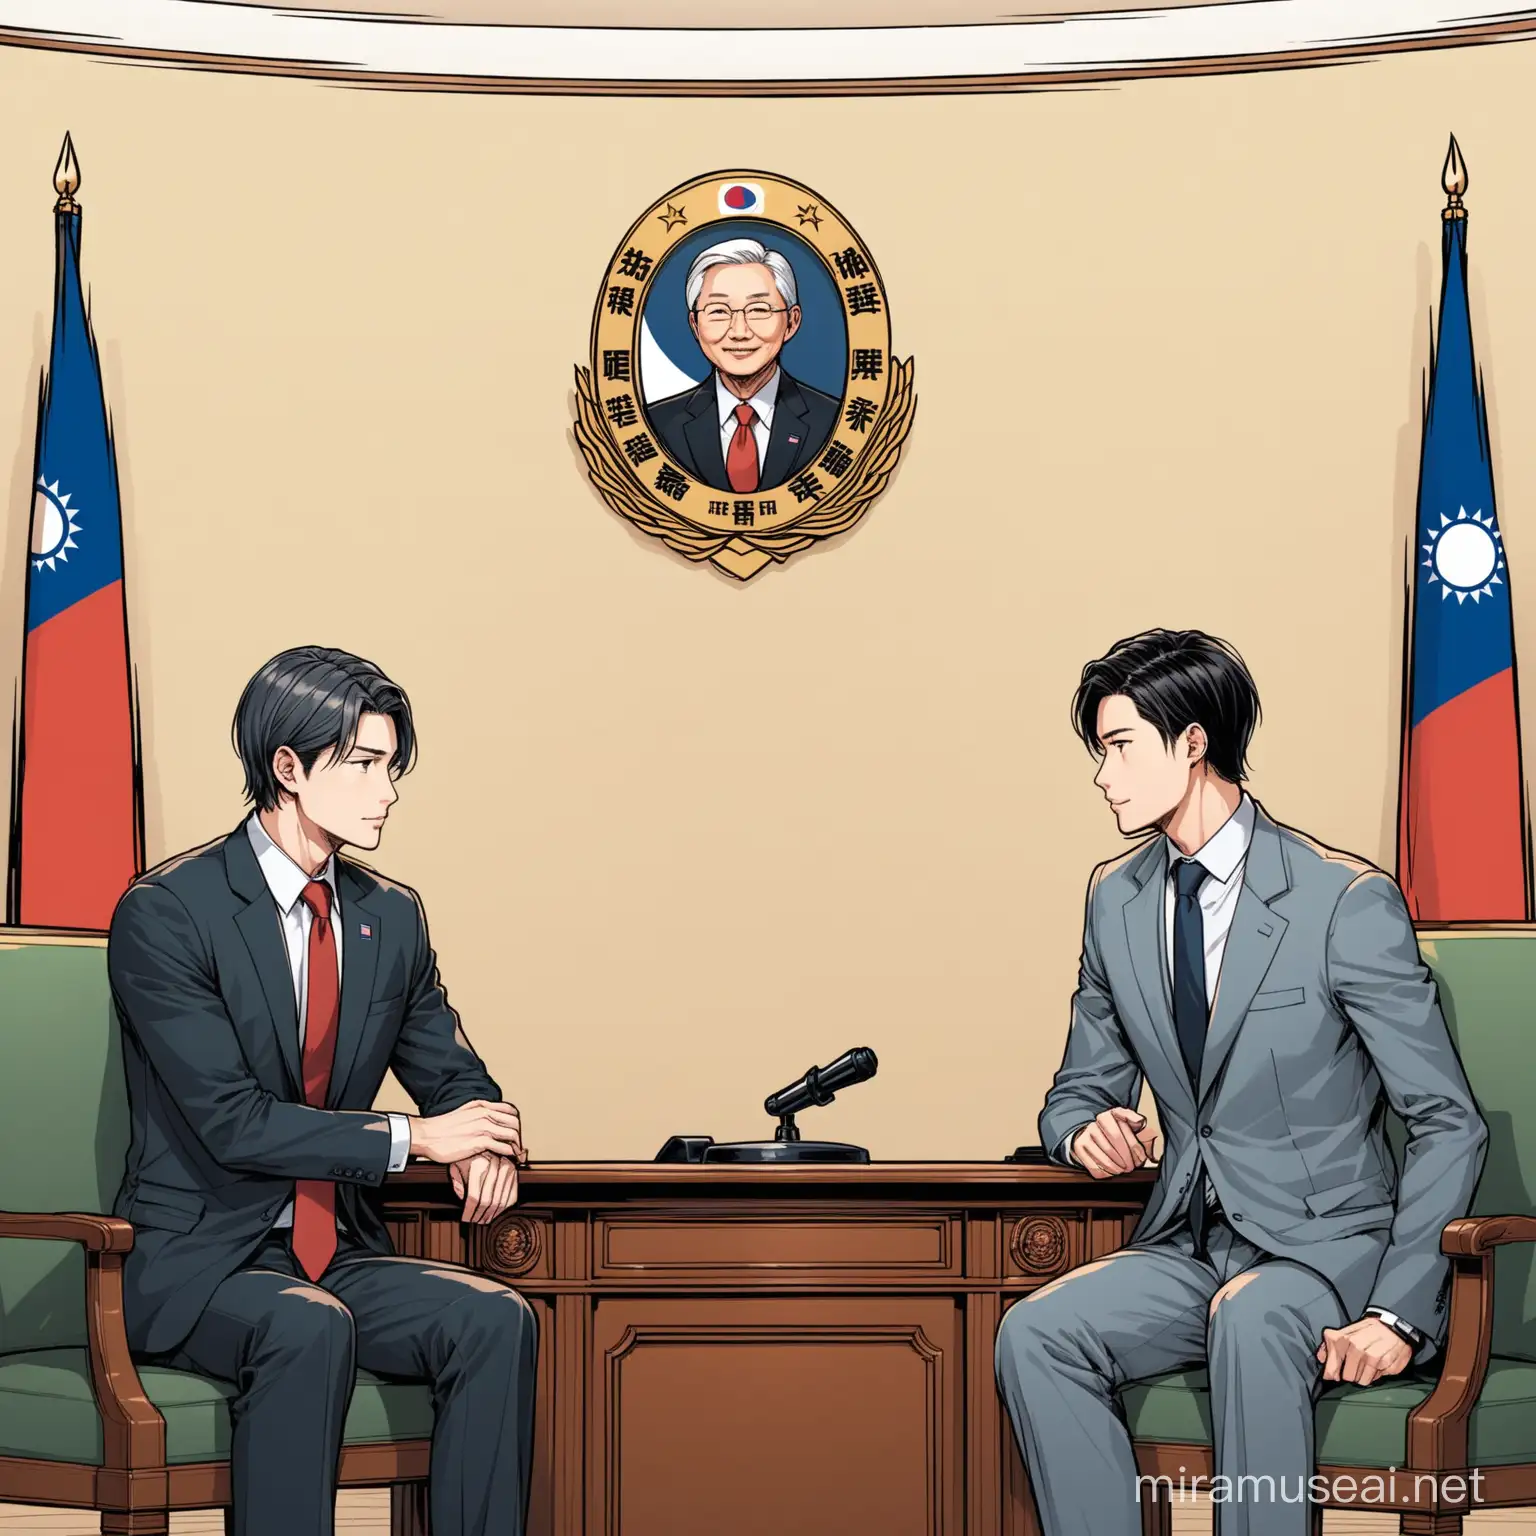 The background is the Oval Office. Taiwan's flag is erected on the wall.

A handsome man in his 20s is wearing a gray suit set. The tie is red.

A handsome man in his 20s sits down and talks with a politician in his 50s.